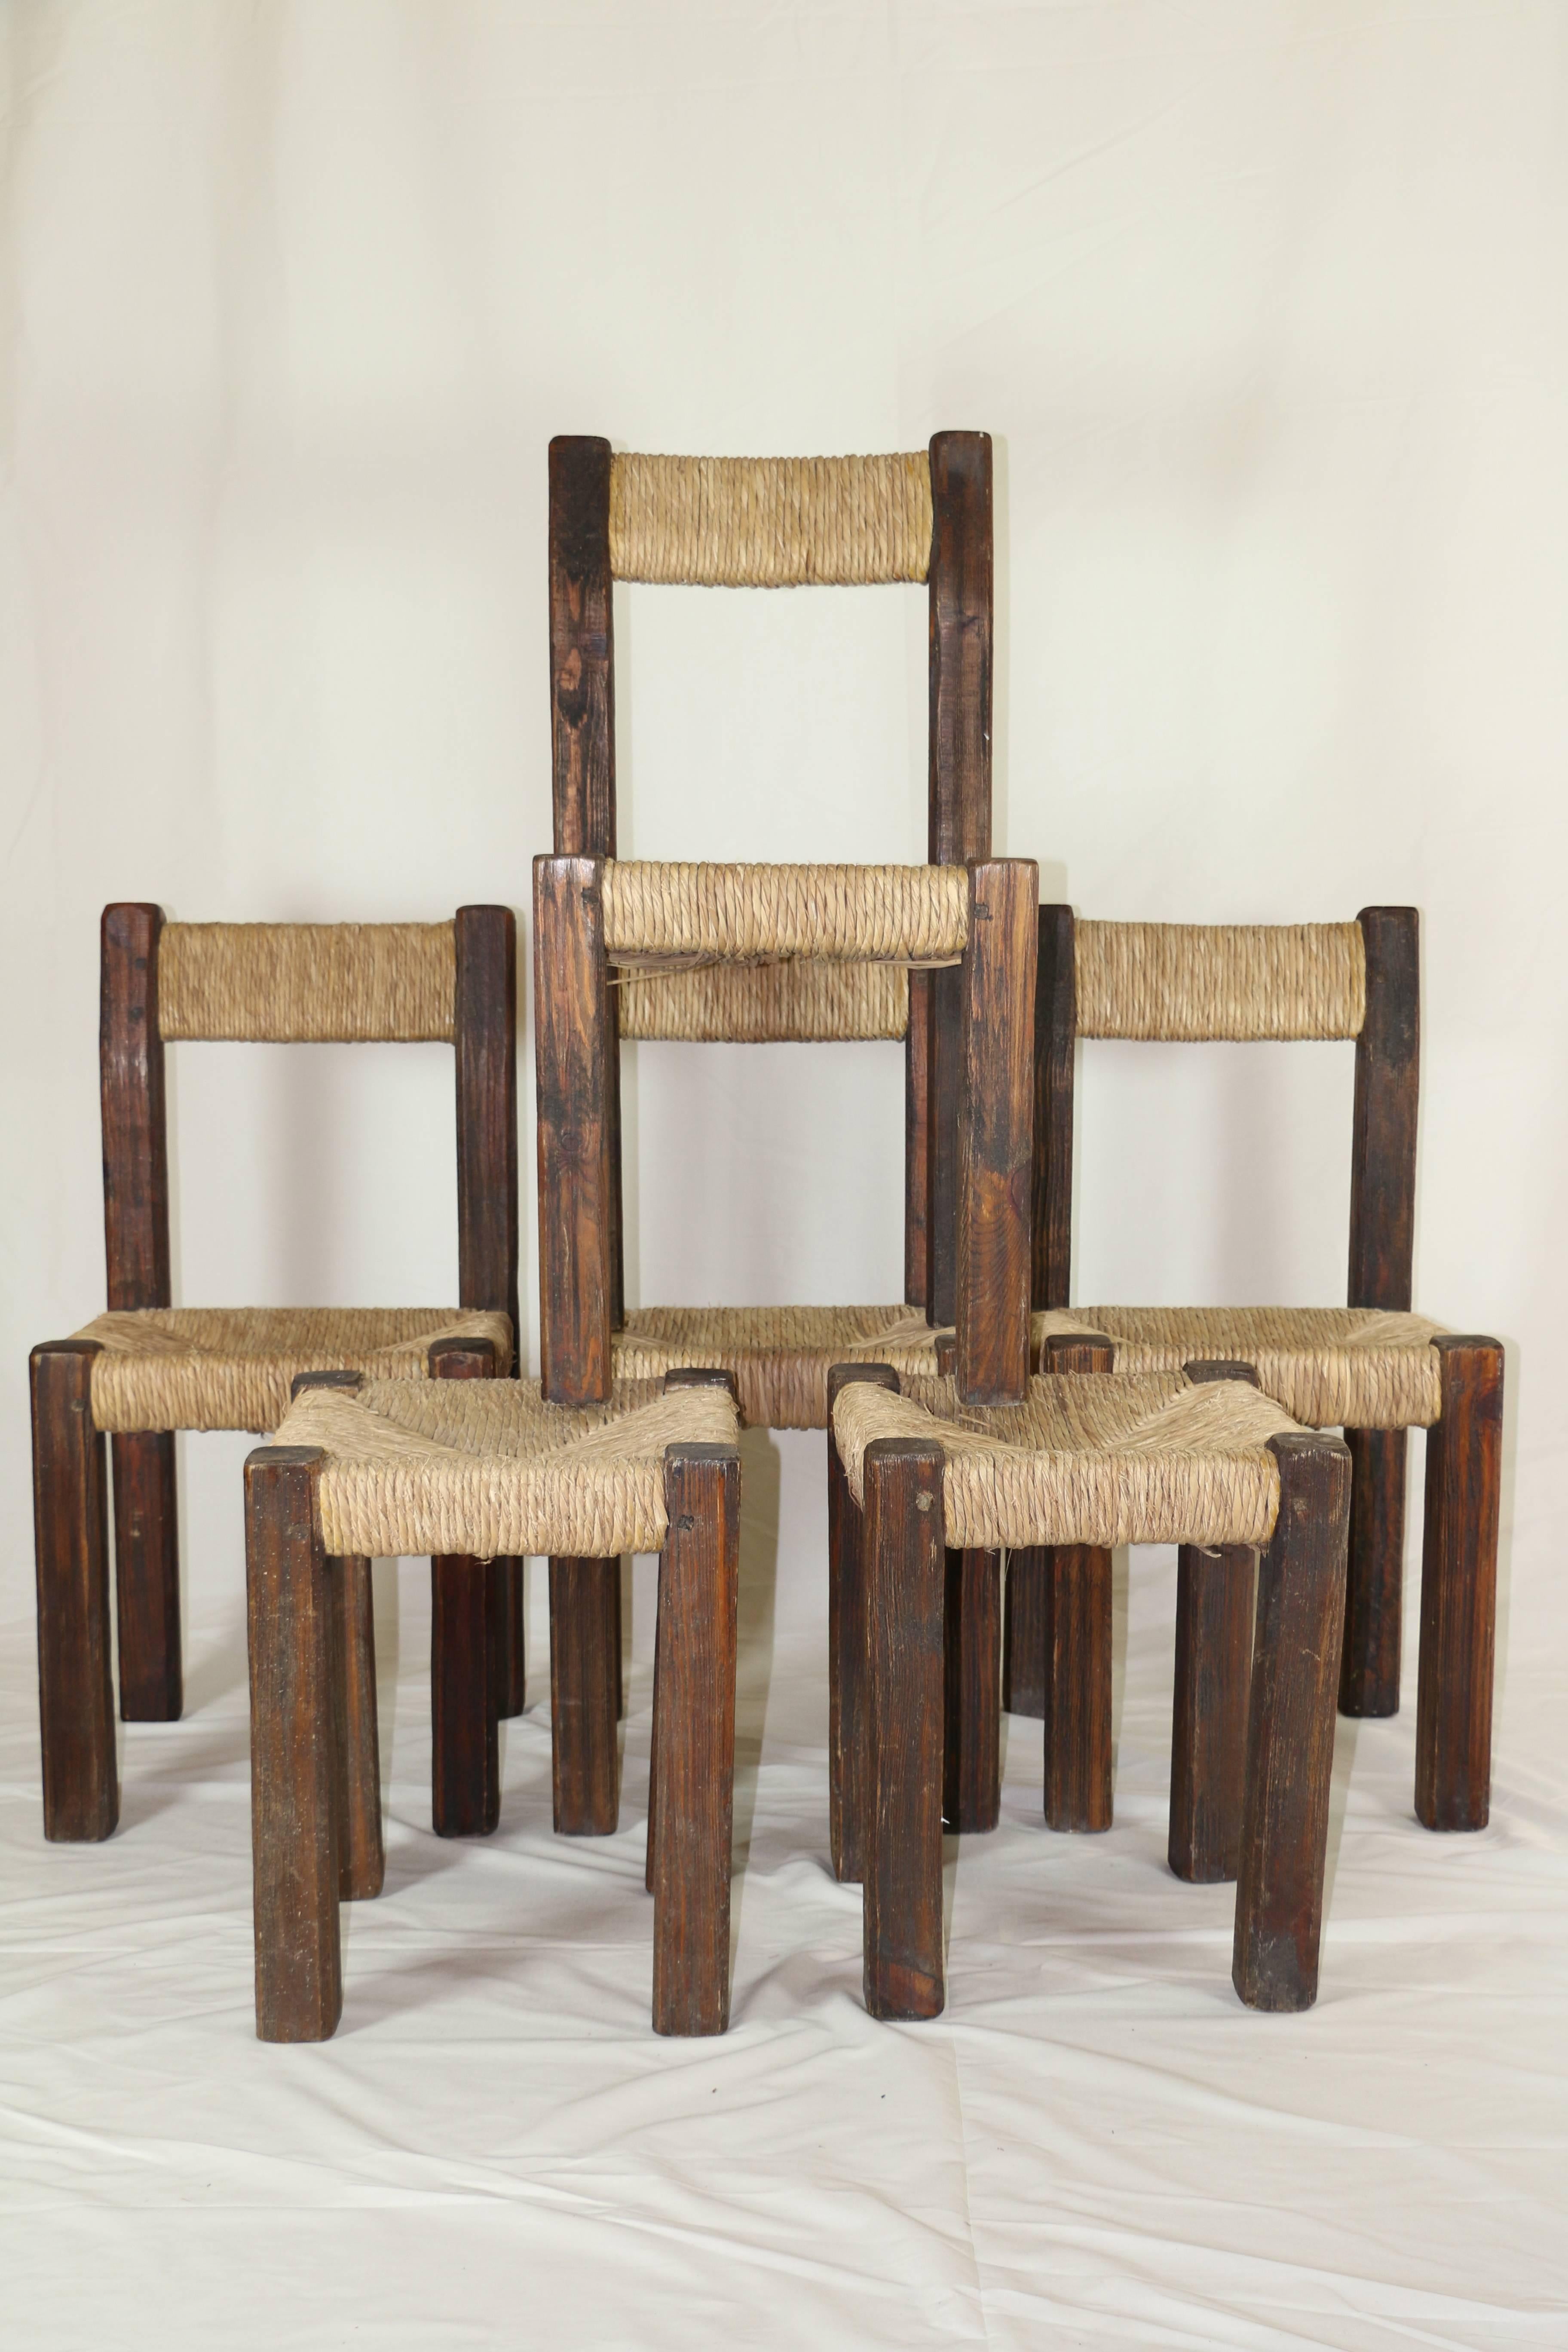 Beautiful set of four chairs and two stools in raw blackened wood. Straw seats, 1960s. Very good condition.

Chairs: Height 85 cm x width 43 cm x depth 43 cm.
Stools: Height 46 cm x width 38 cm x depth 38 cm.